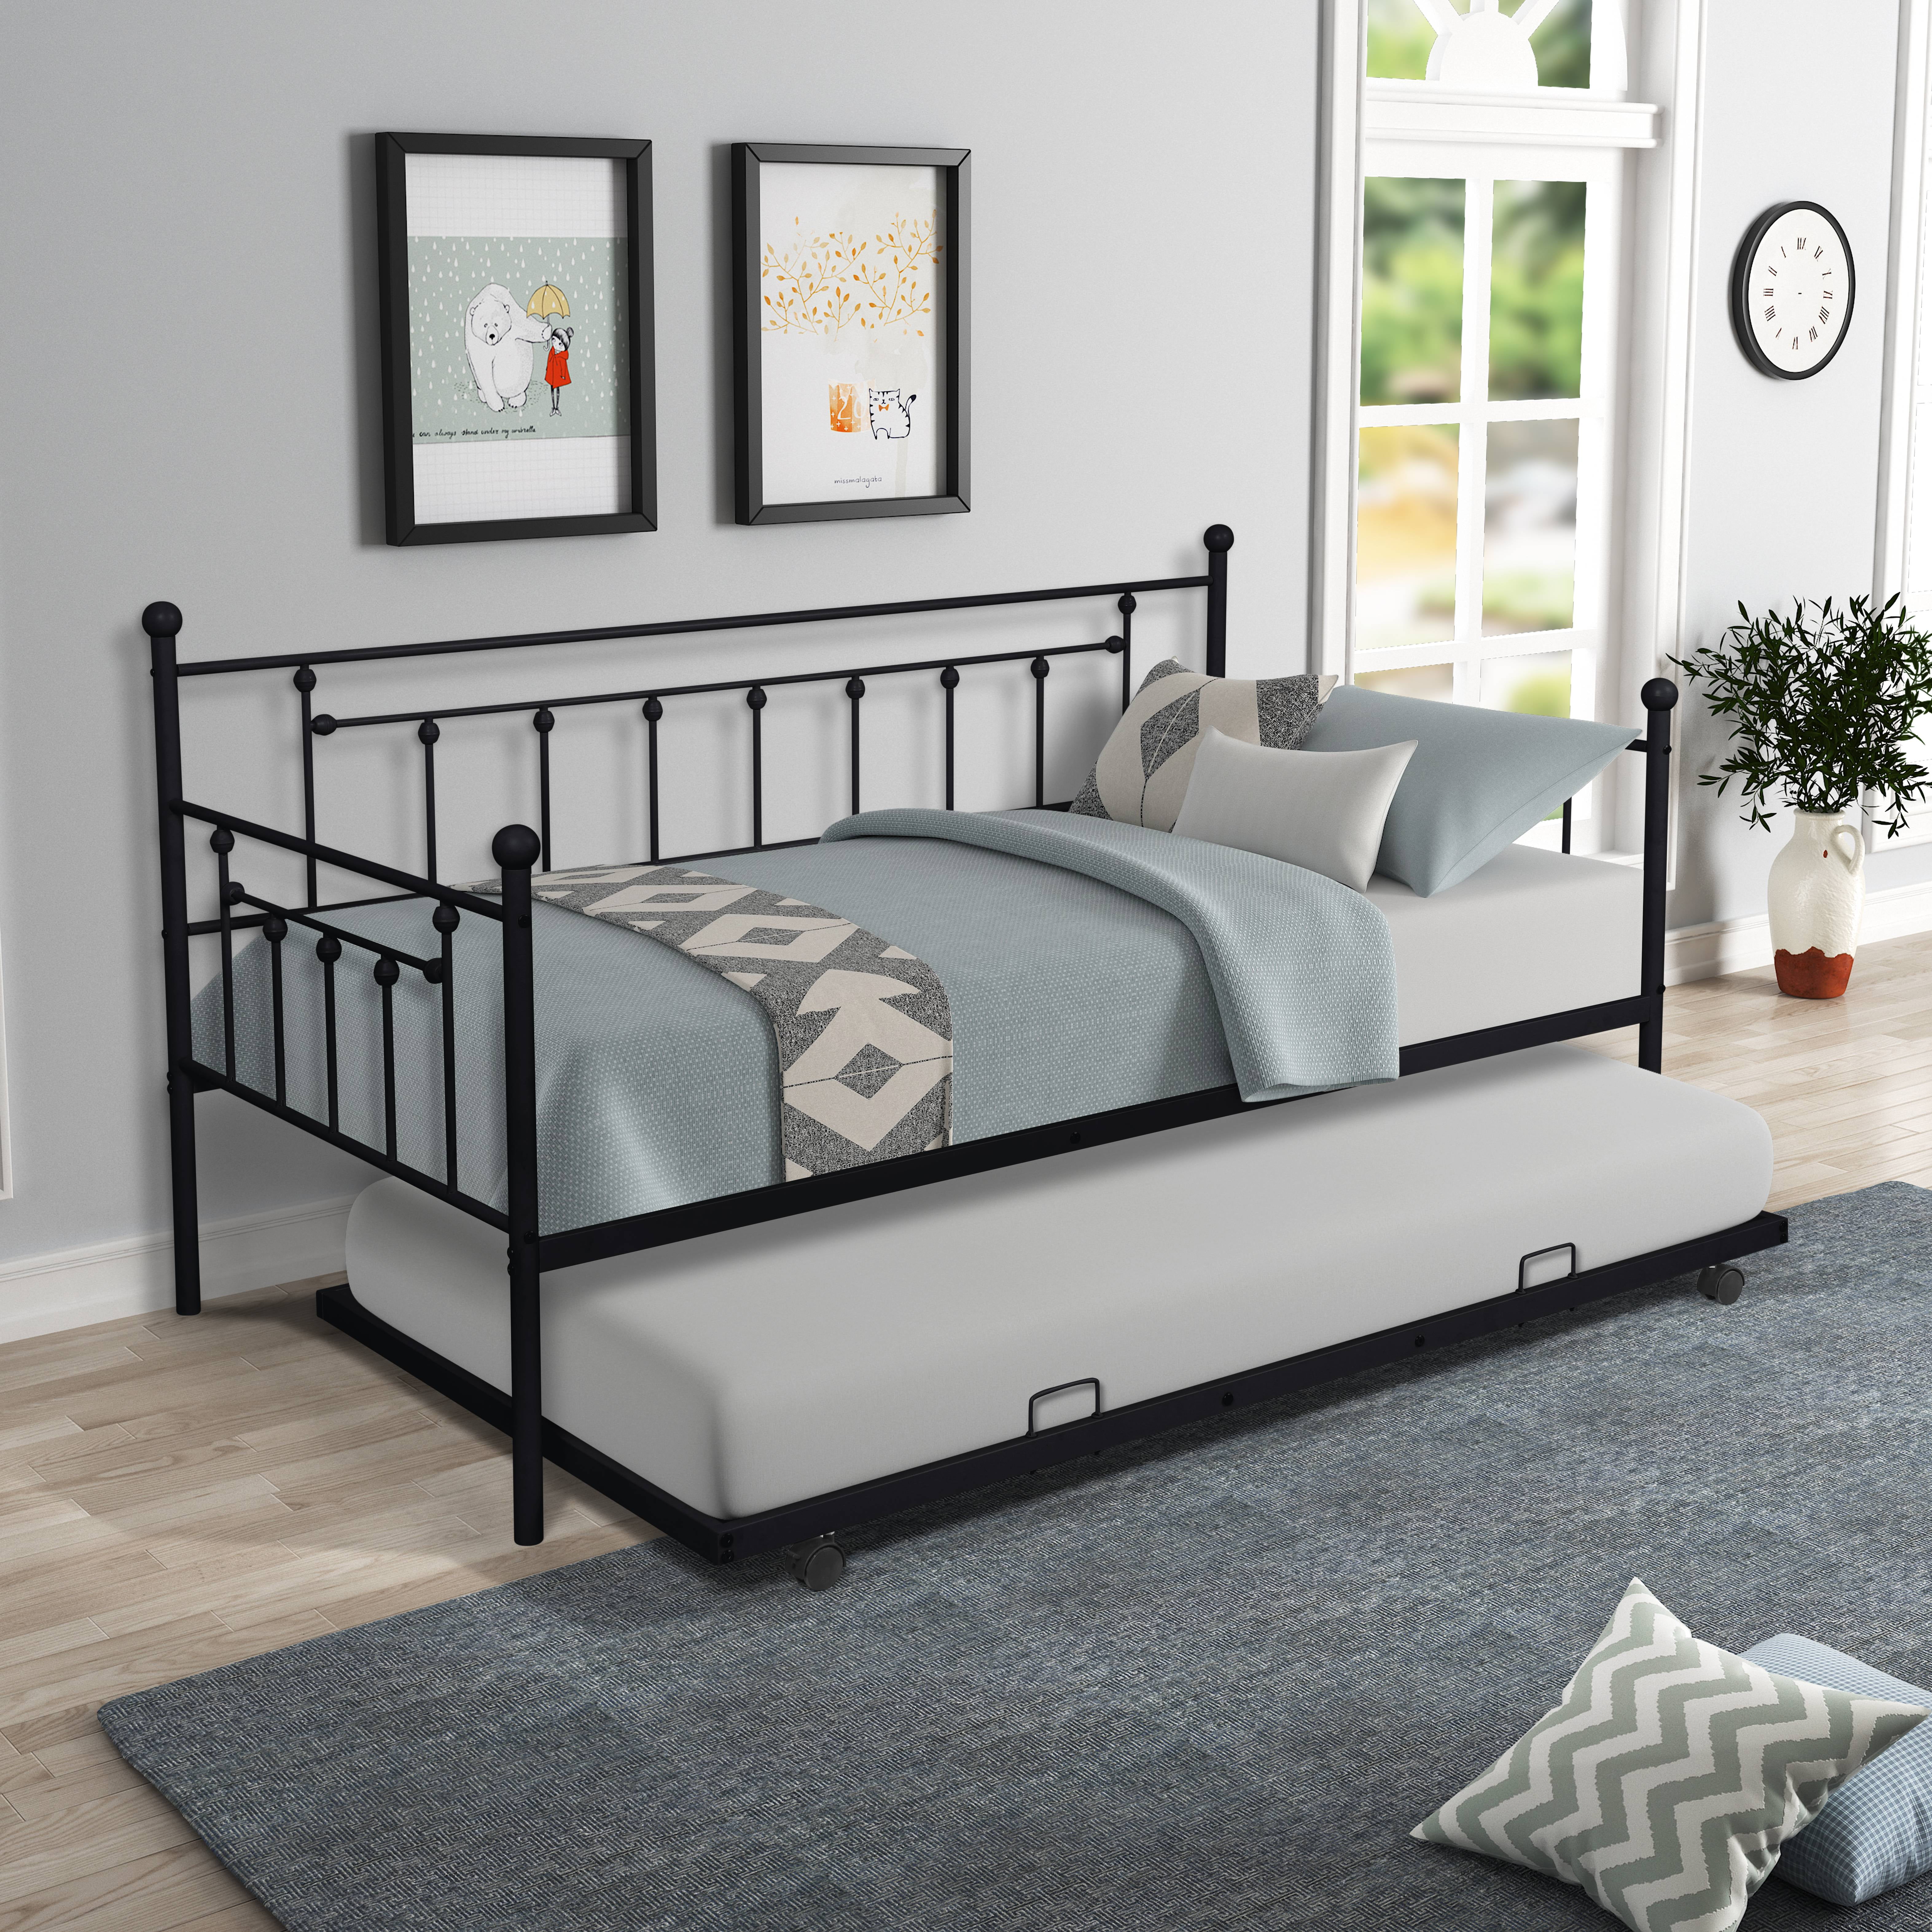 How much space do you need for a trundle bed Twin Daybed With Trundle Metal Twin Size Bed Frame Kids Bed With Pullout Trundle Steel Slat Support Twin Daybed And Roll Out Trundle Bed Frame For Kids Teens Adults No Box Spring